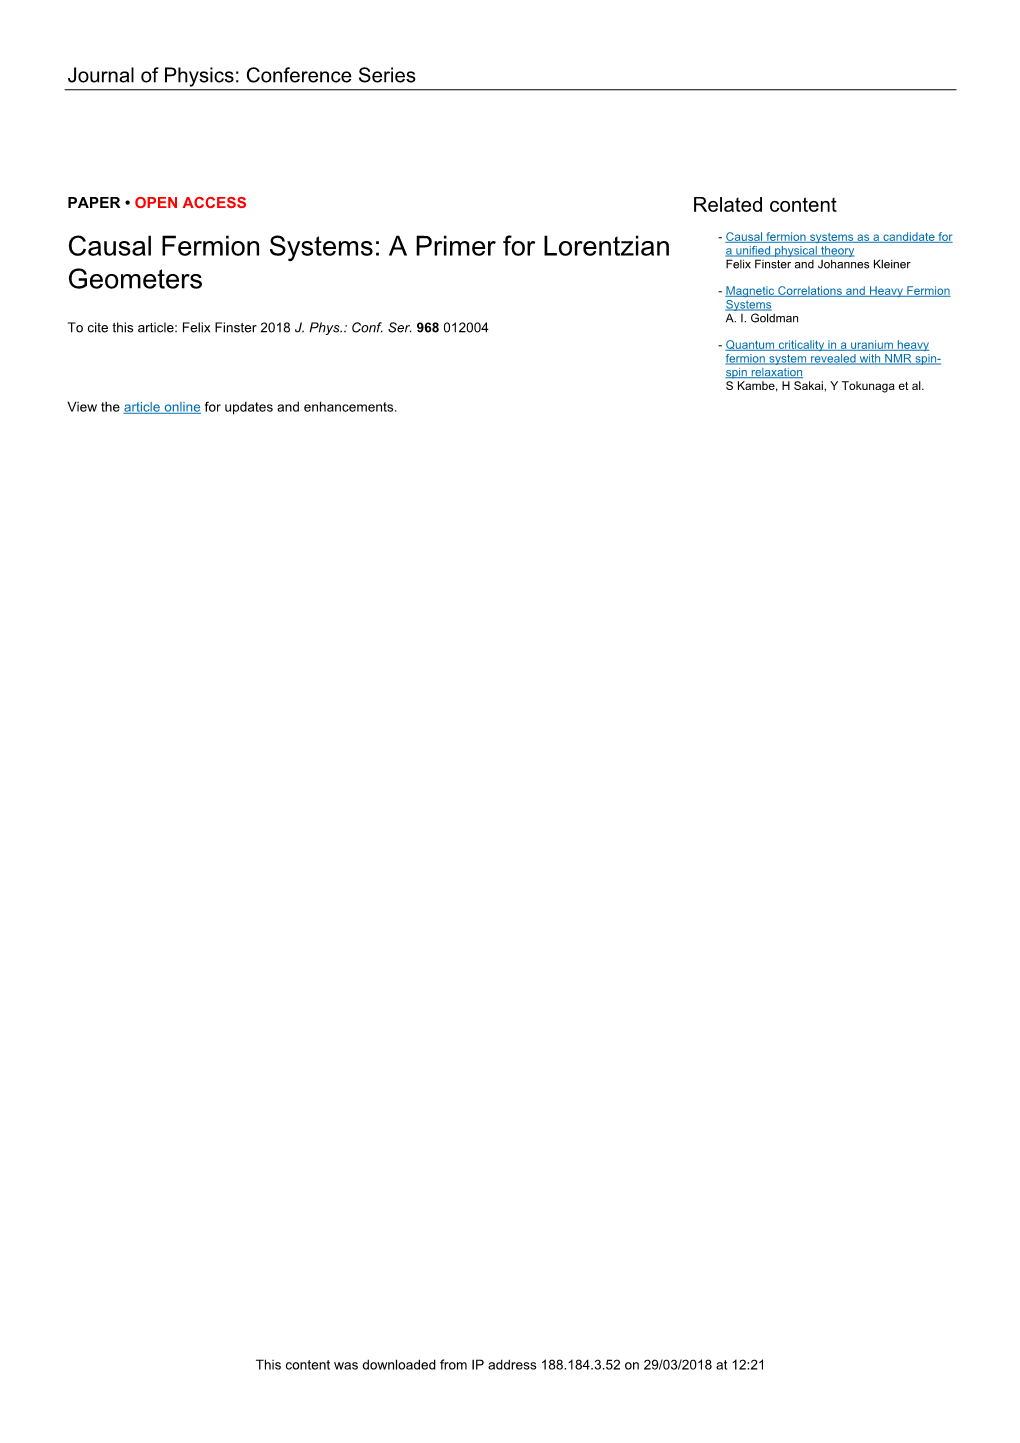 Causal Fermion Systems As a Candidate for Causal Fermion Systems: a Primer for Lorentzian a Unified Physical Theory Felix Finster and Johannes Kleiner